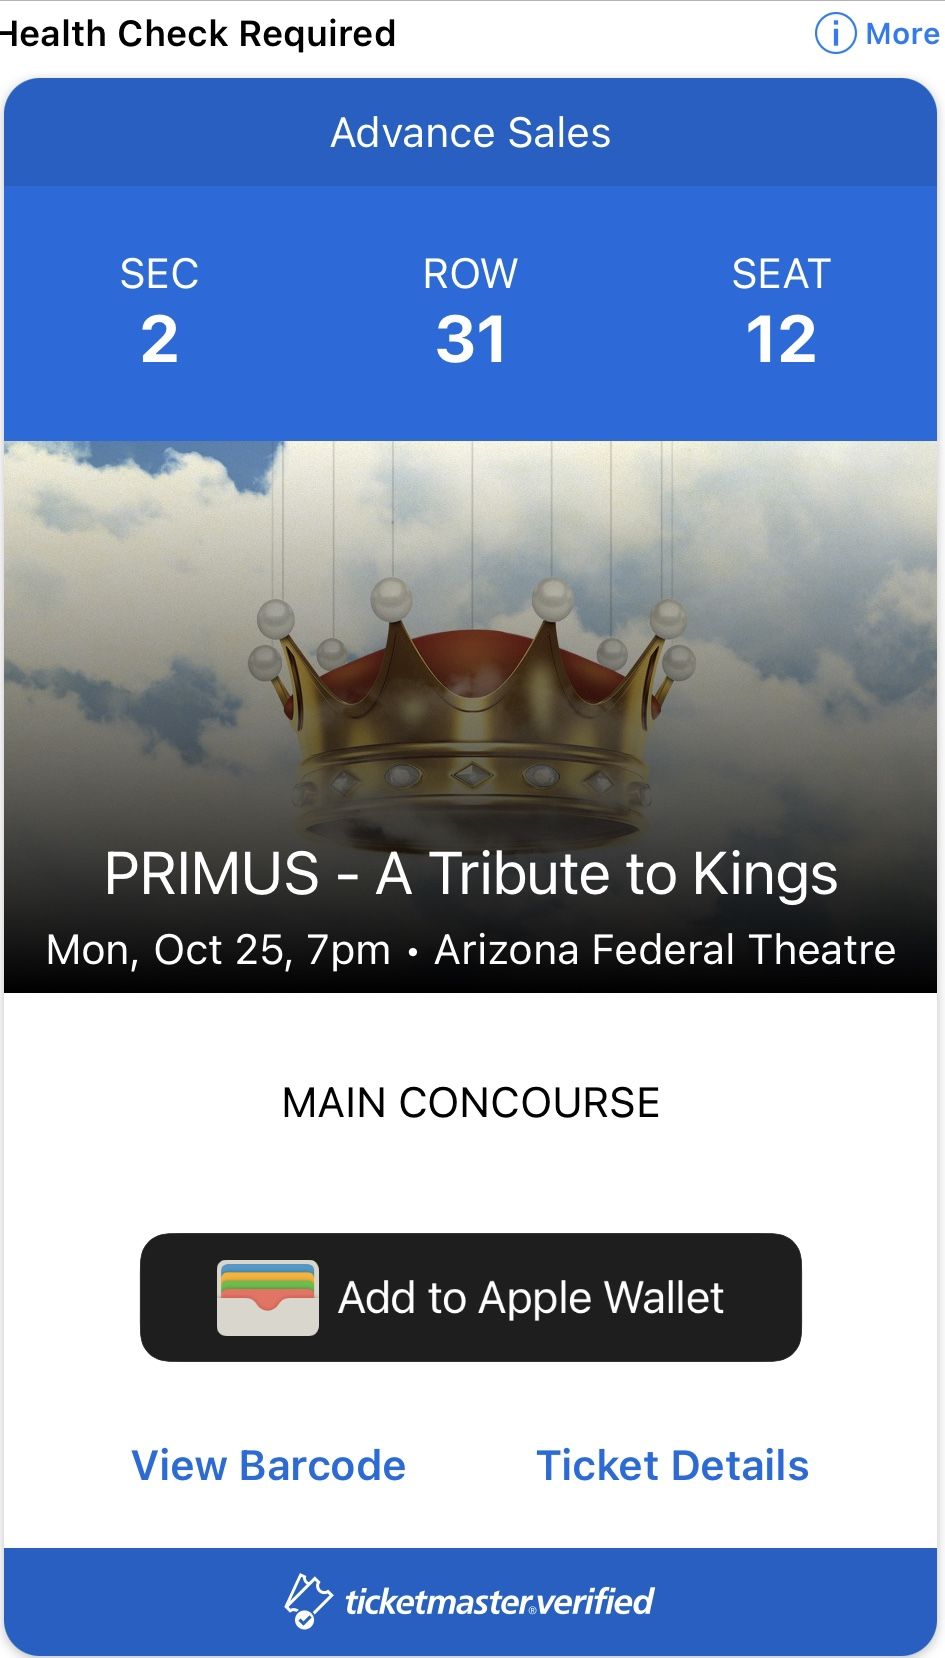 One Primus Ticket For Monday OCT 25